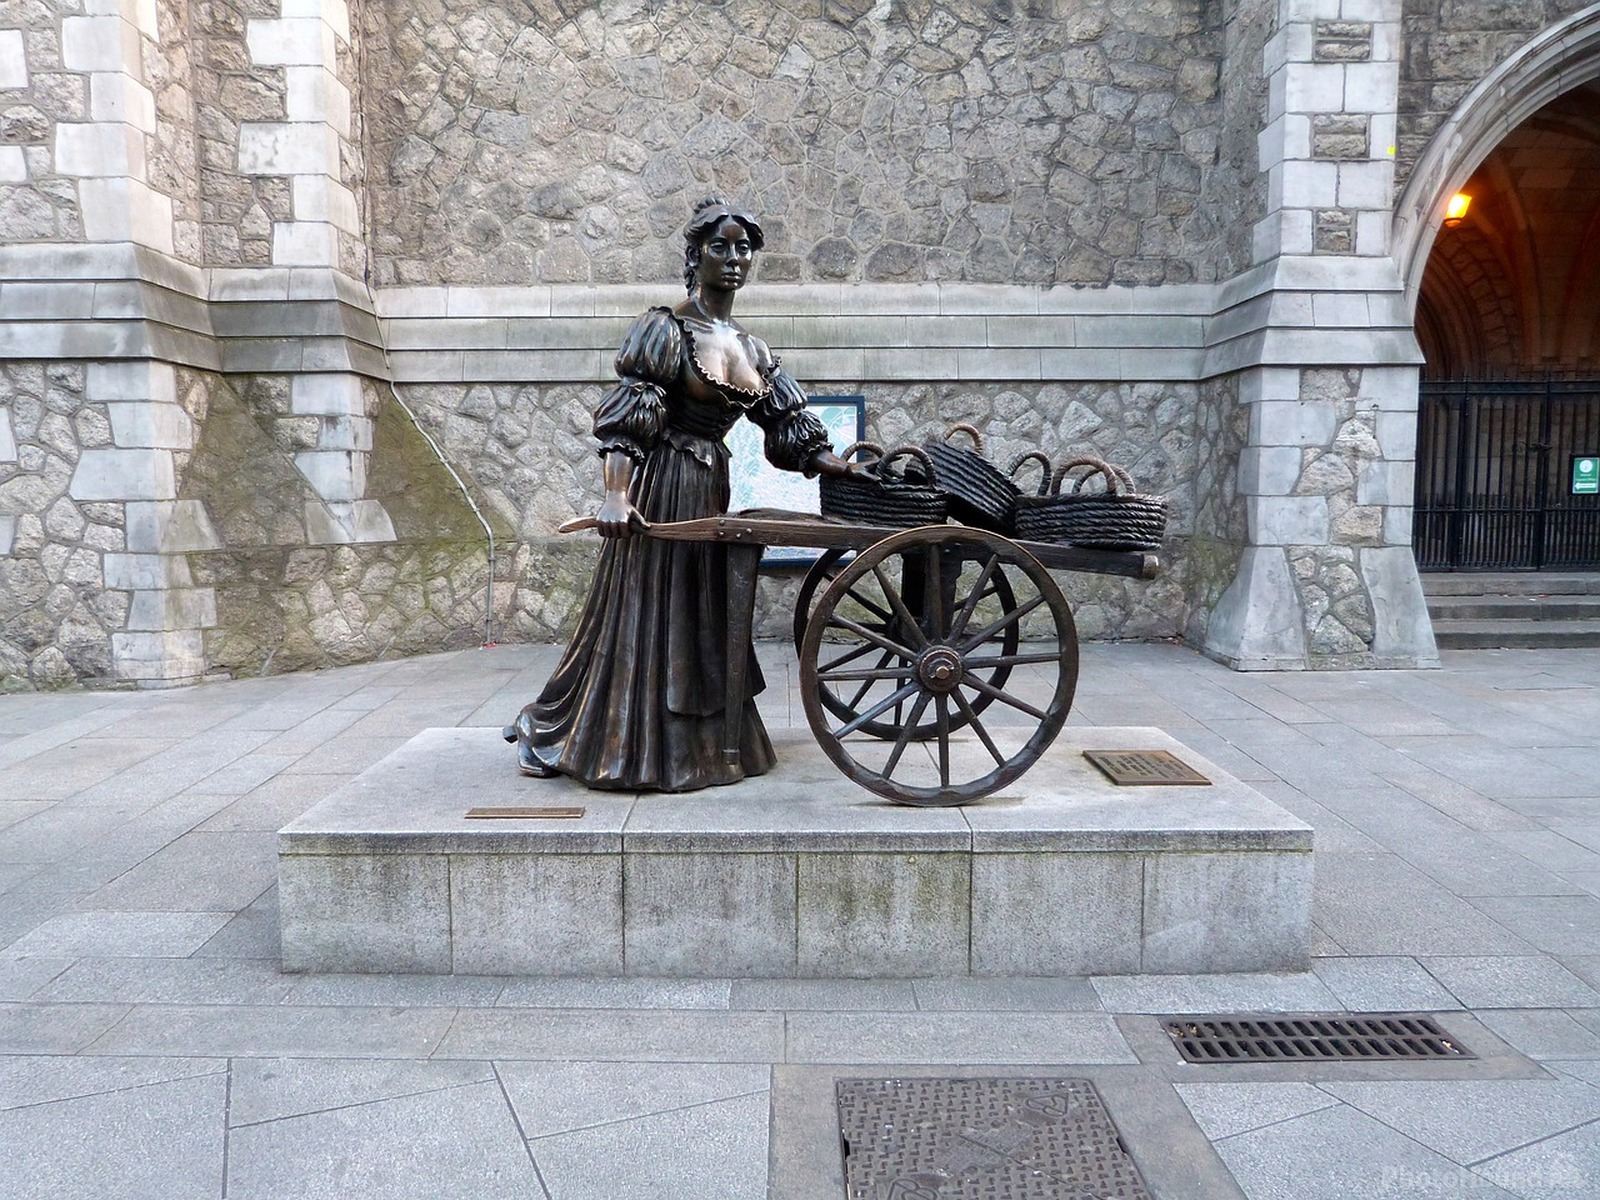 Image of Molly Malone Statue by Team PhotoHound